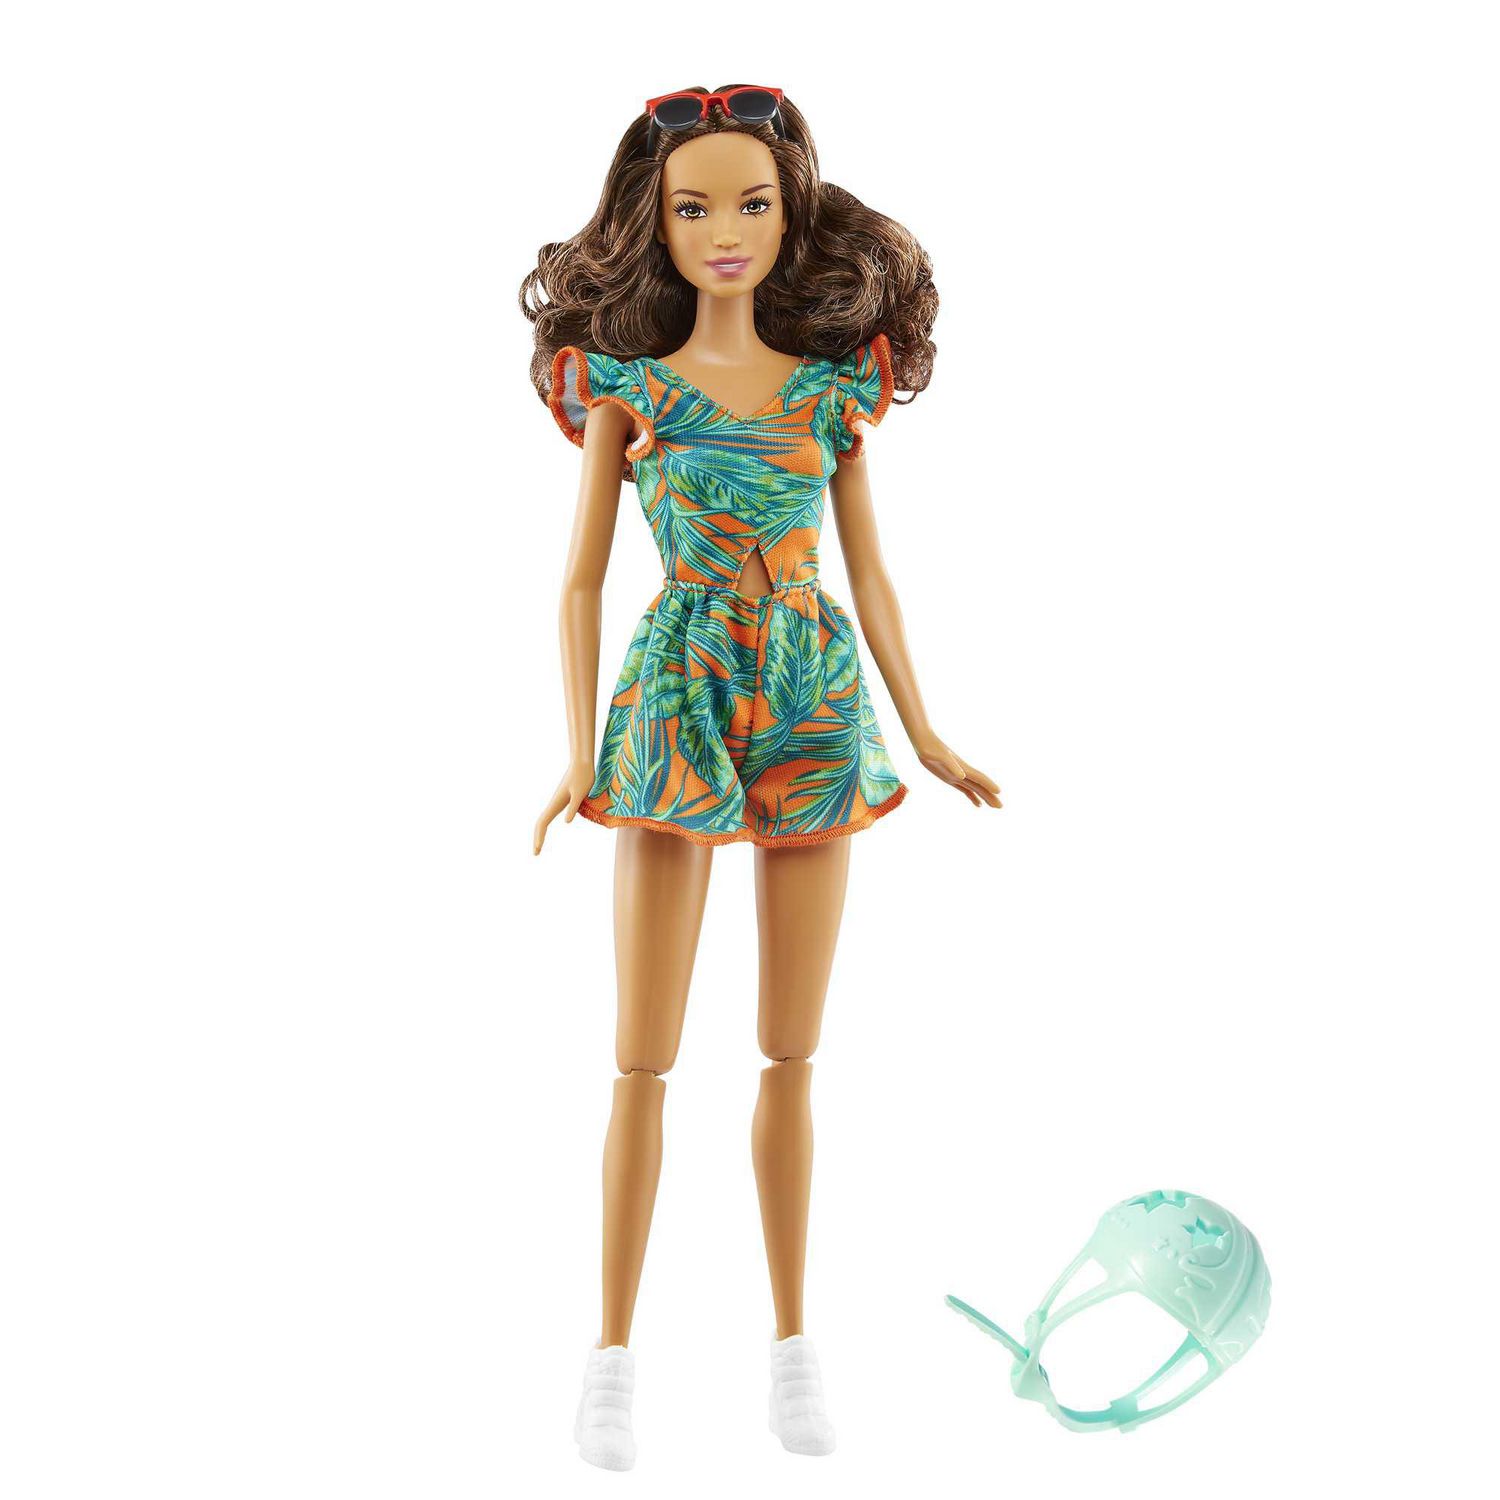 avni bhatia recommends Barbie Potty Game